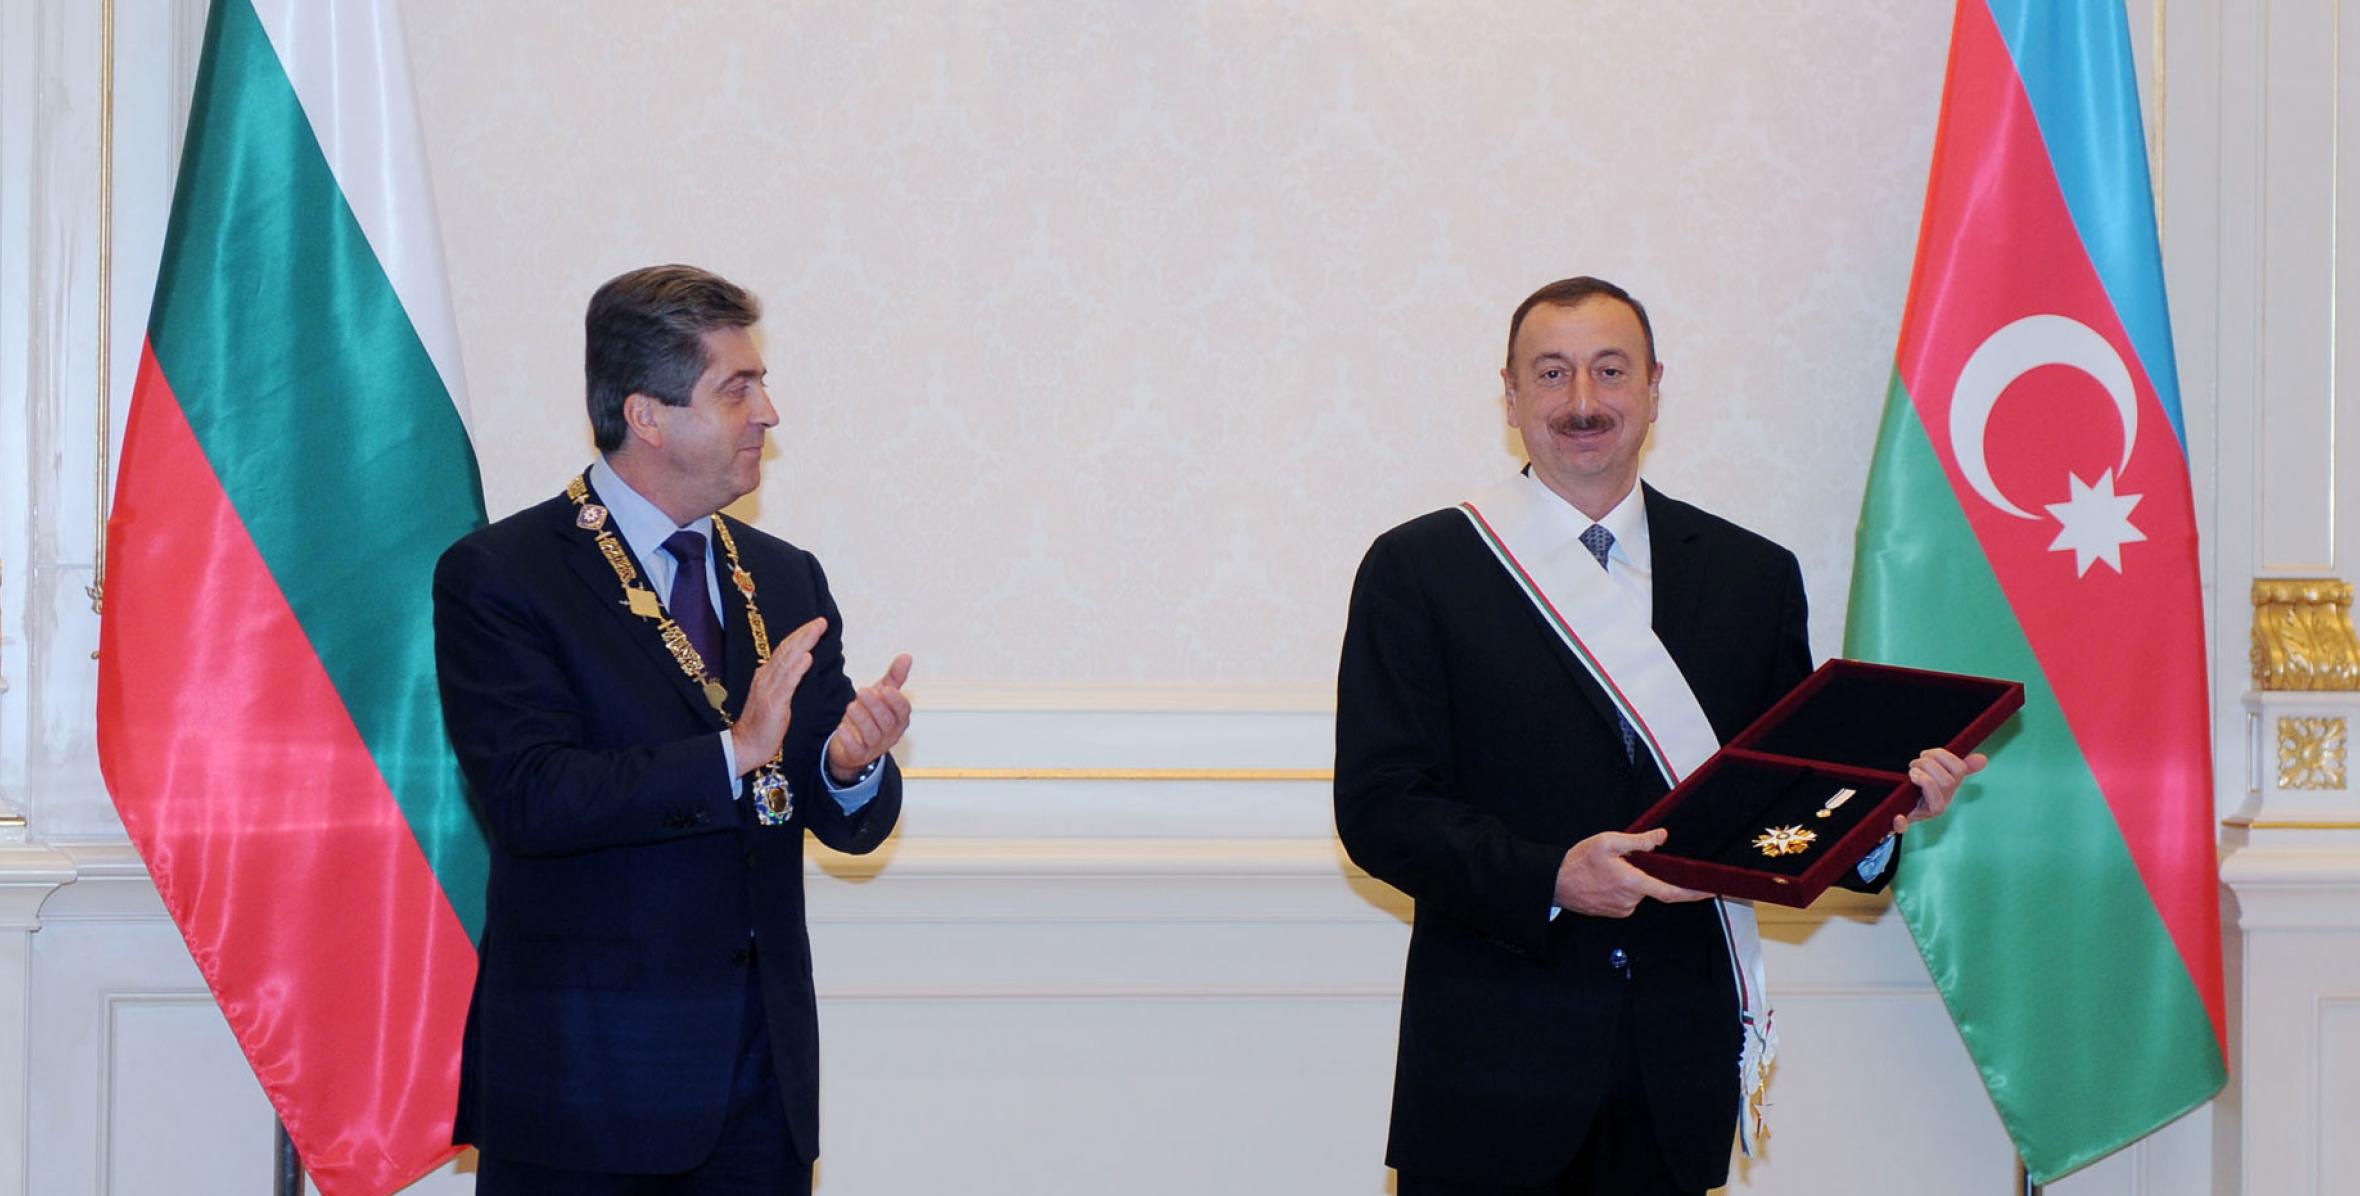 A ceremony was held to decorate Bulgarian President Georgi Parvanov and Ilham Aliyev with high awards